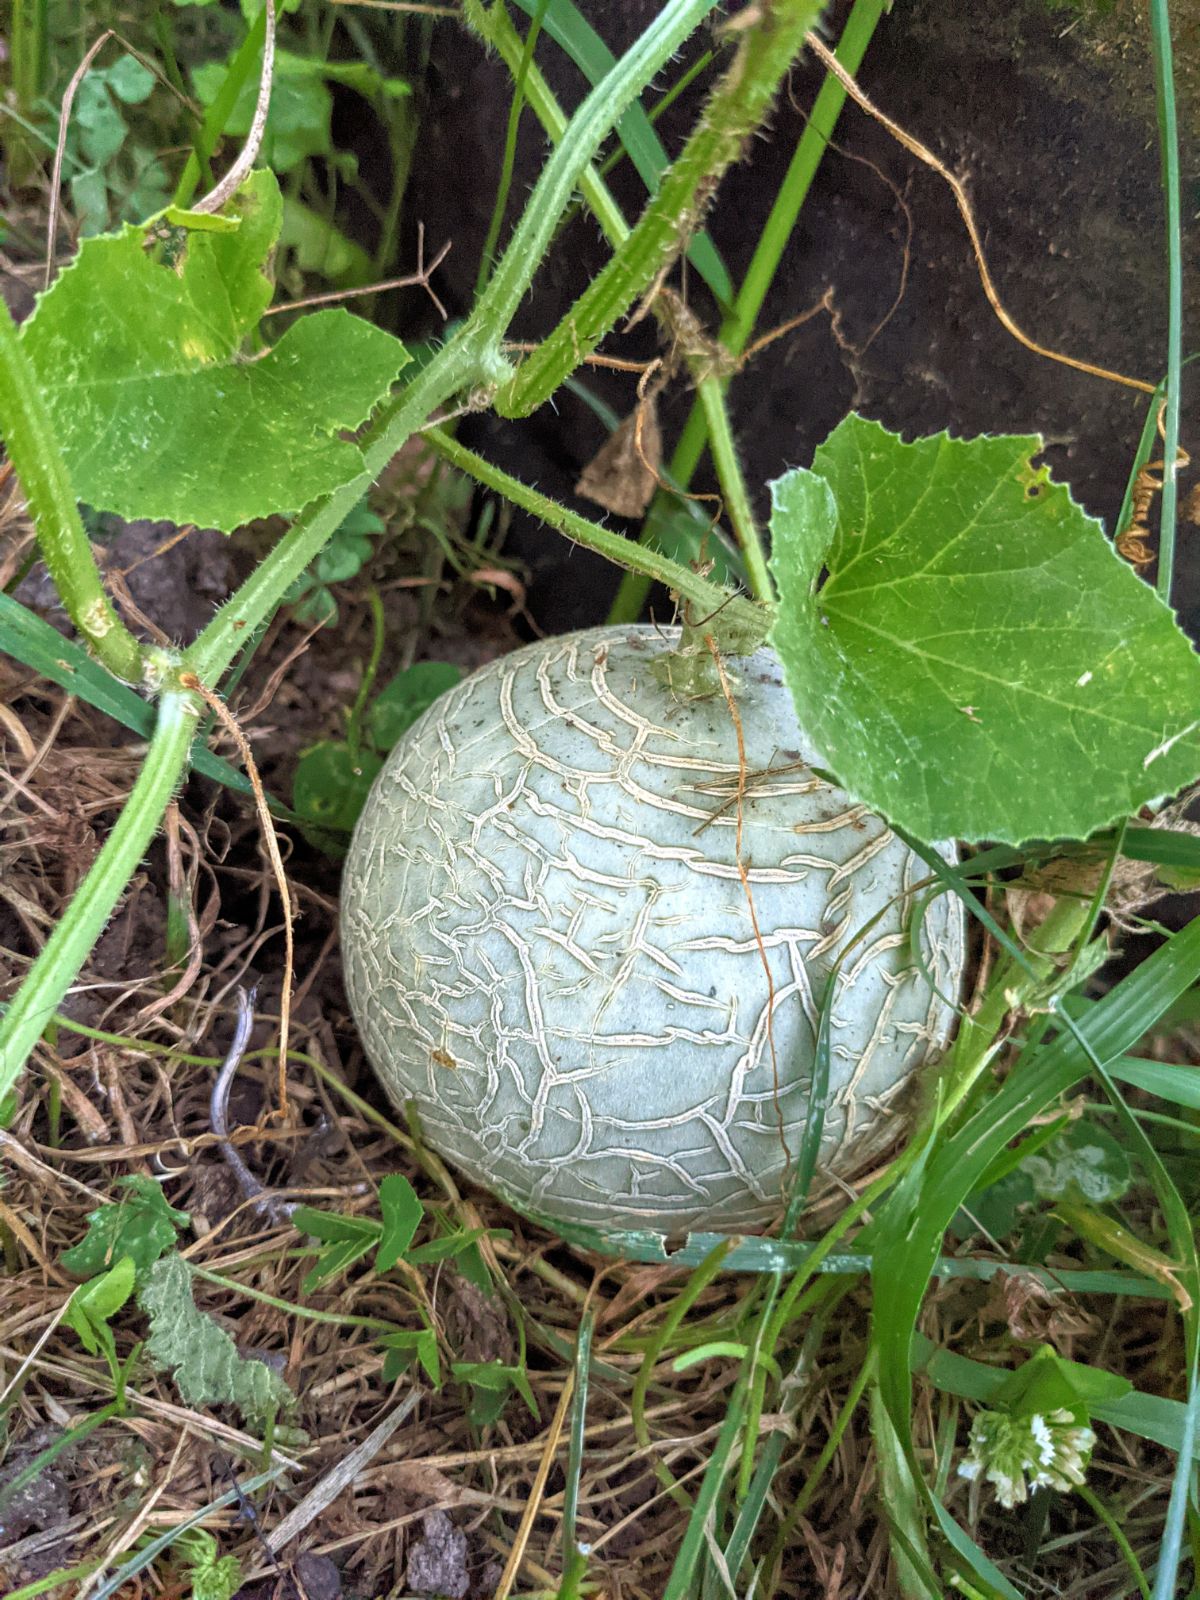 Small cantaloupe growing on the plant in the garden